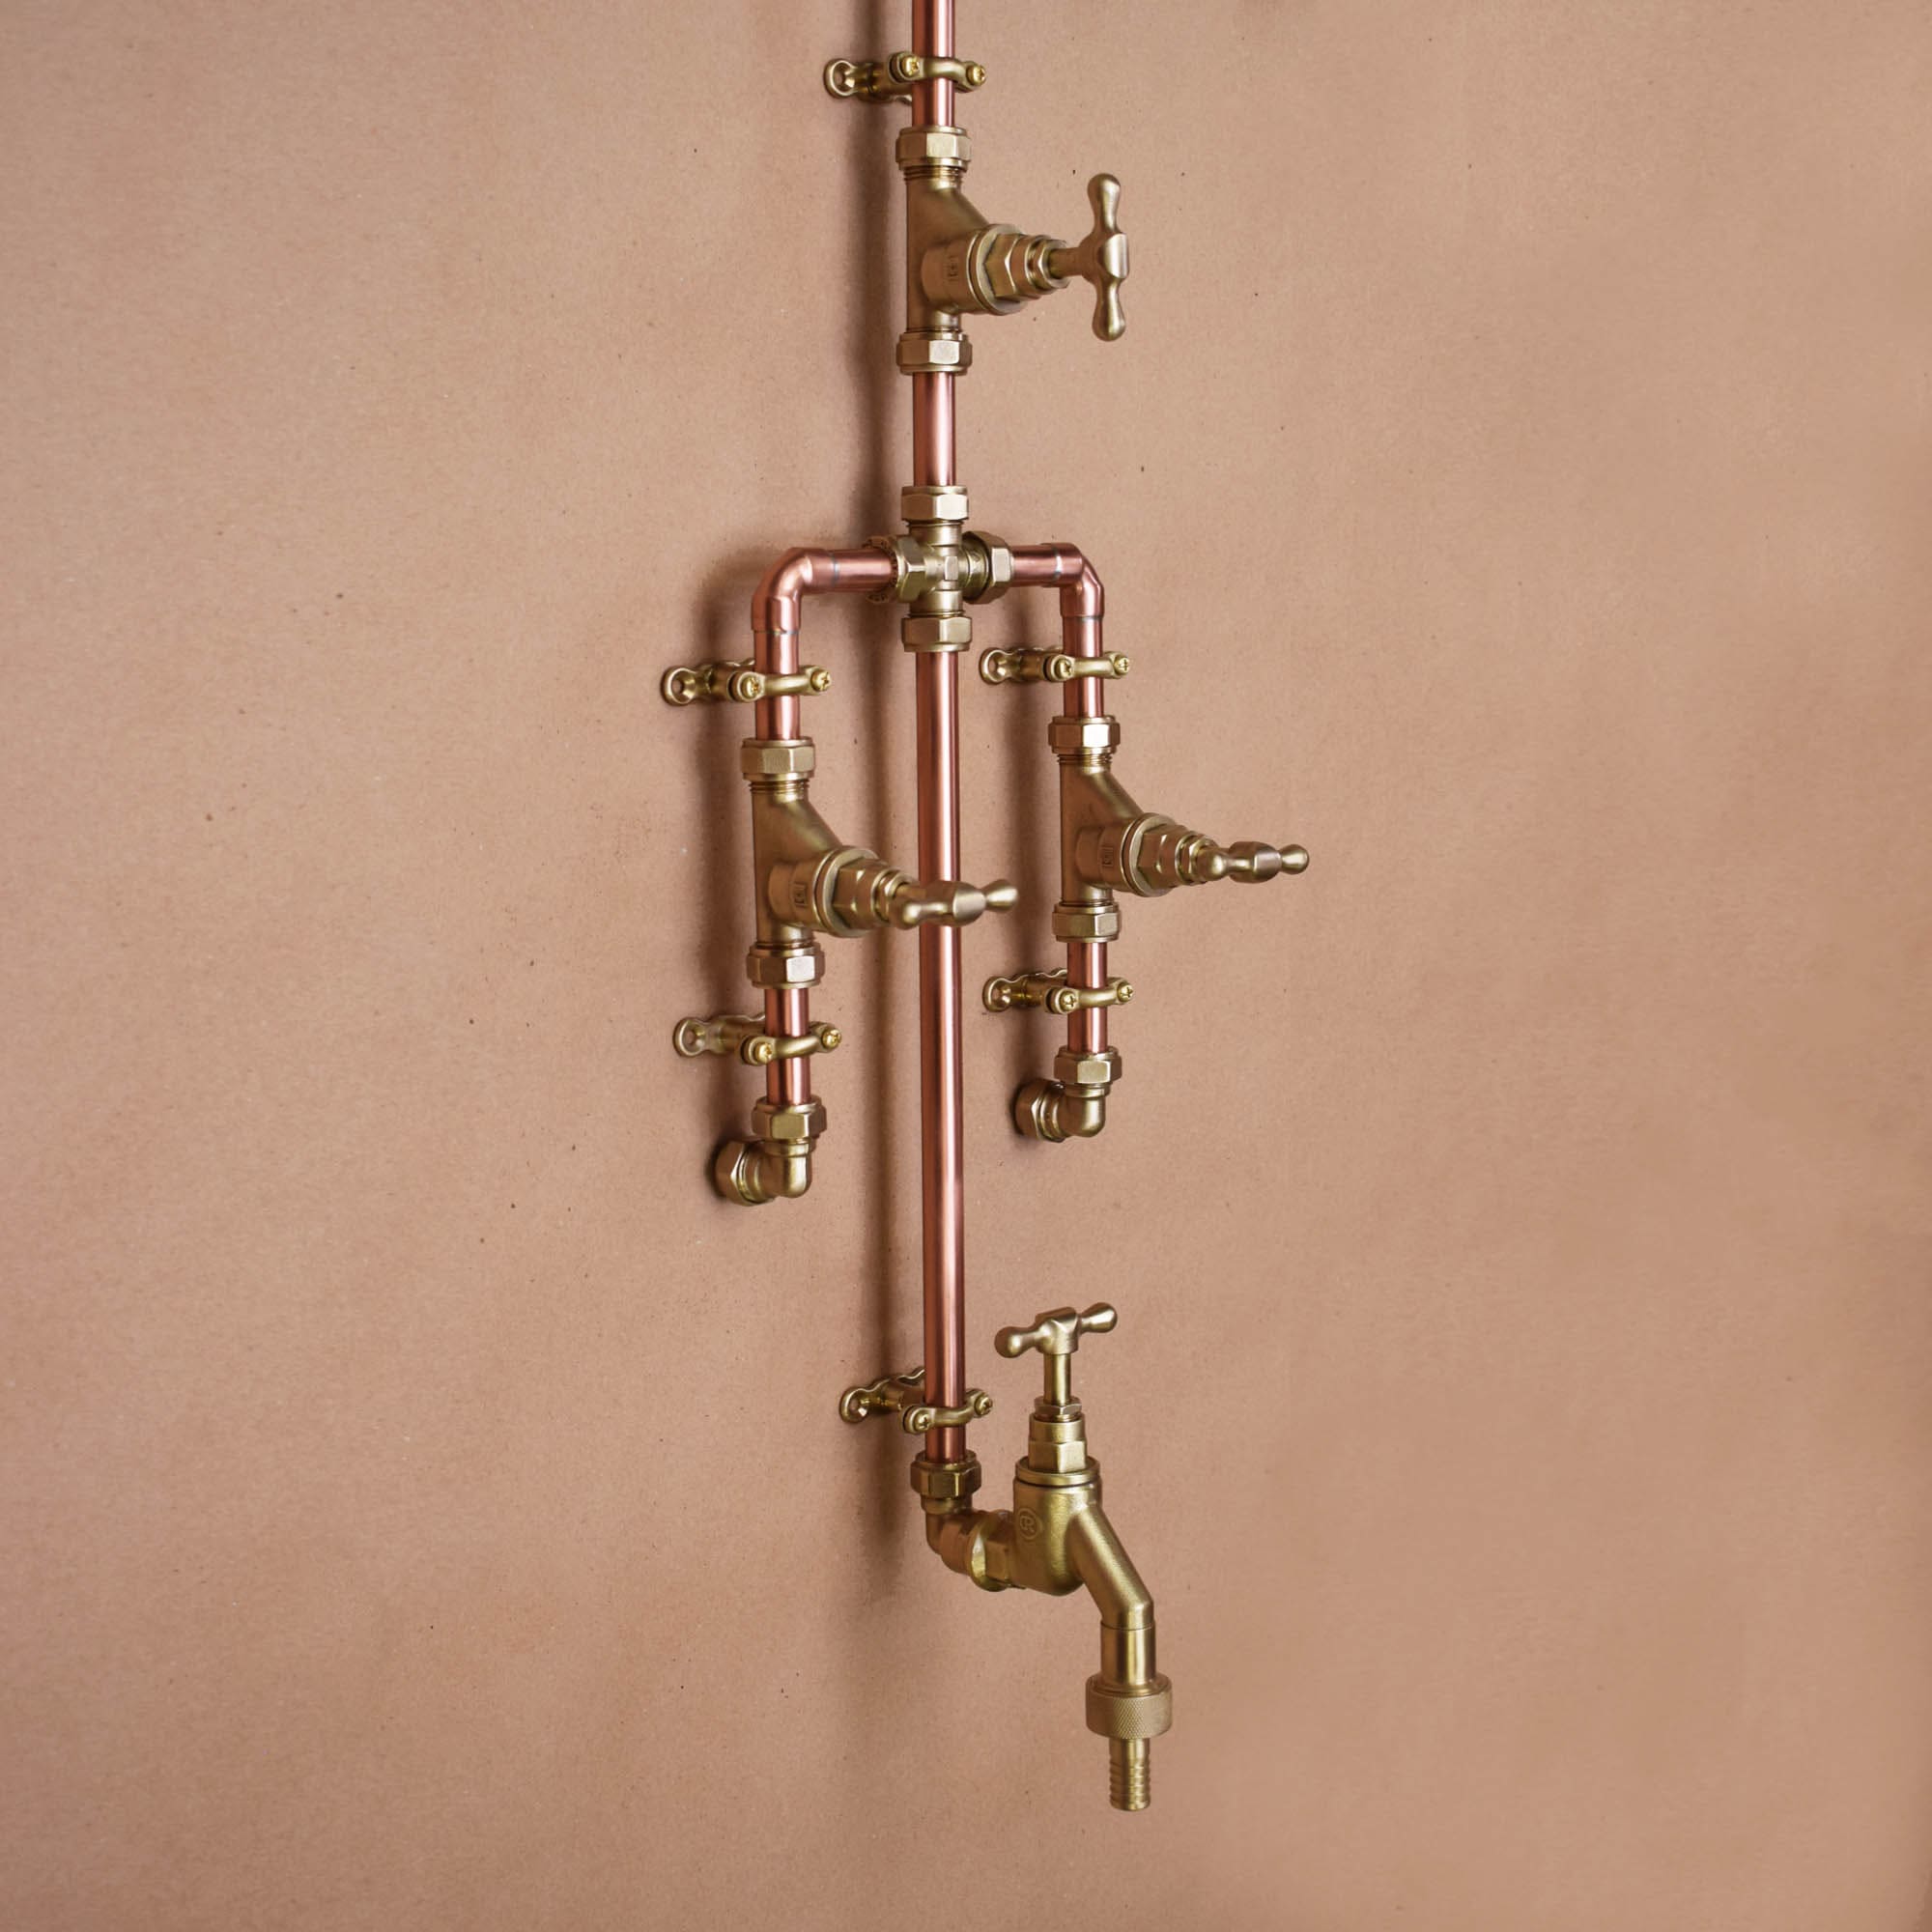 Vintage-inspired copper outdoor shower with a curved design on a plastered wall